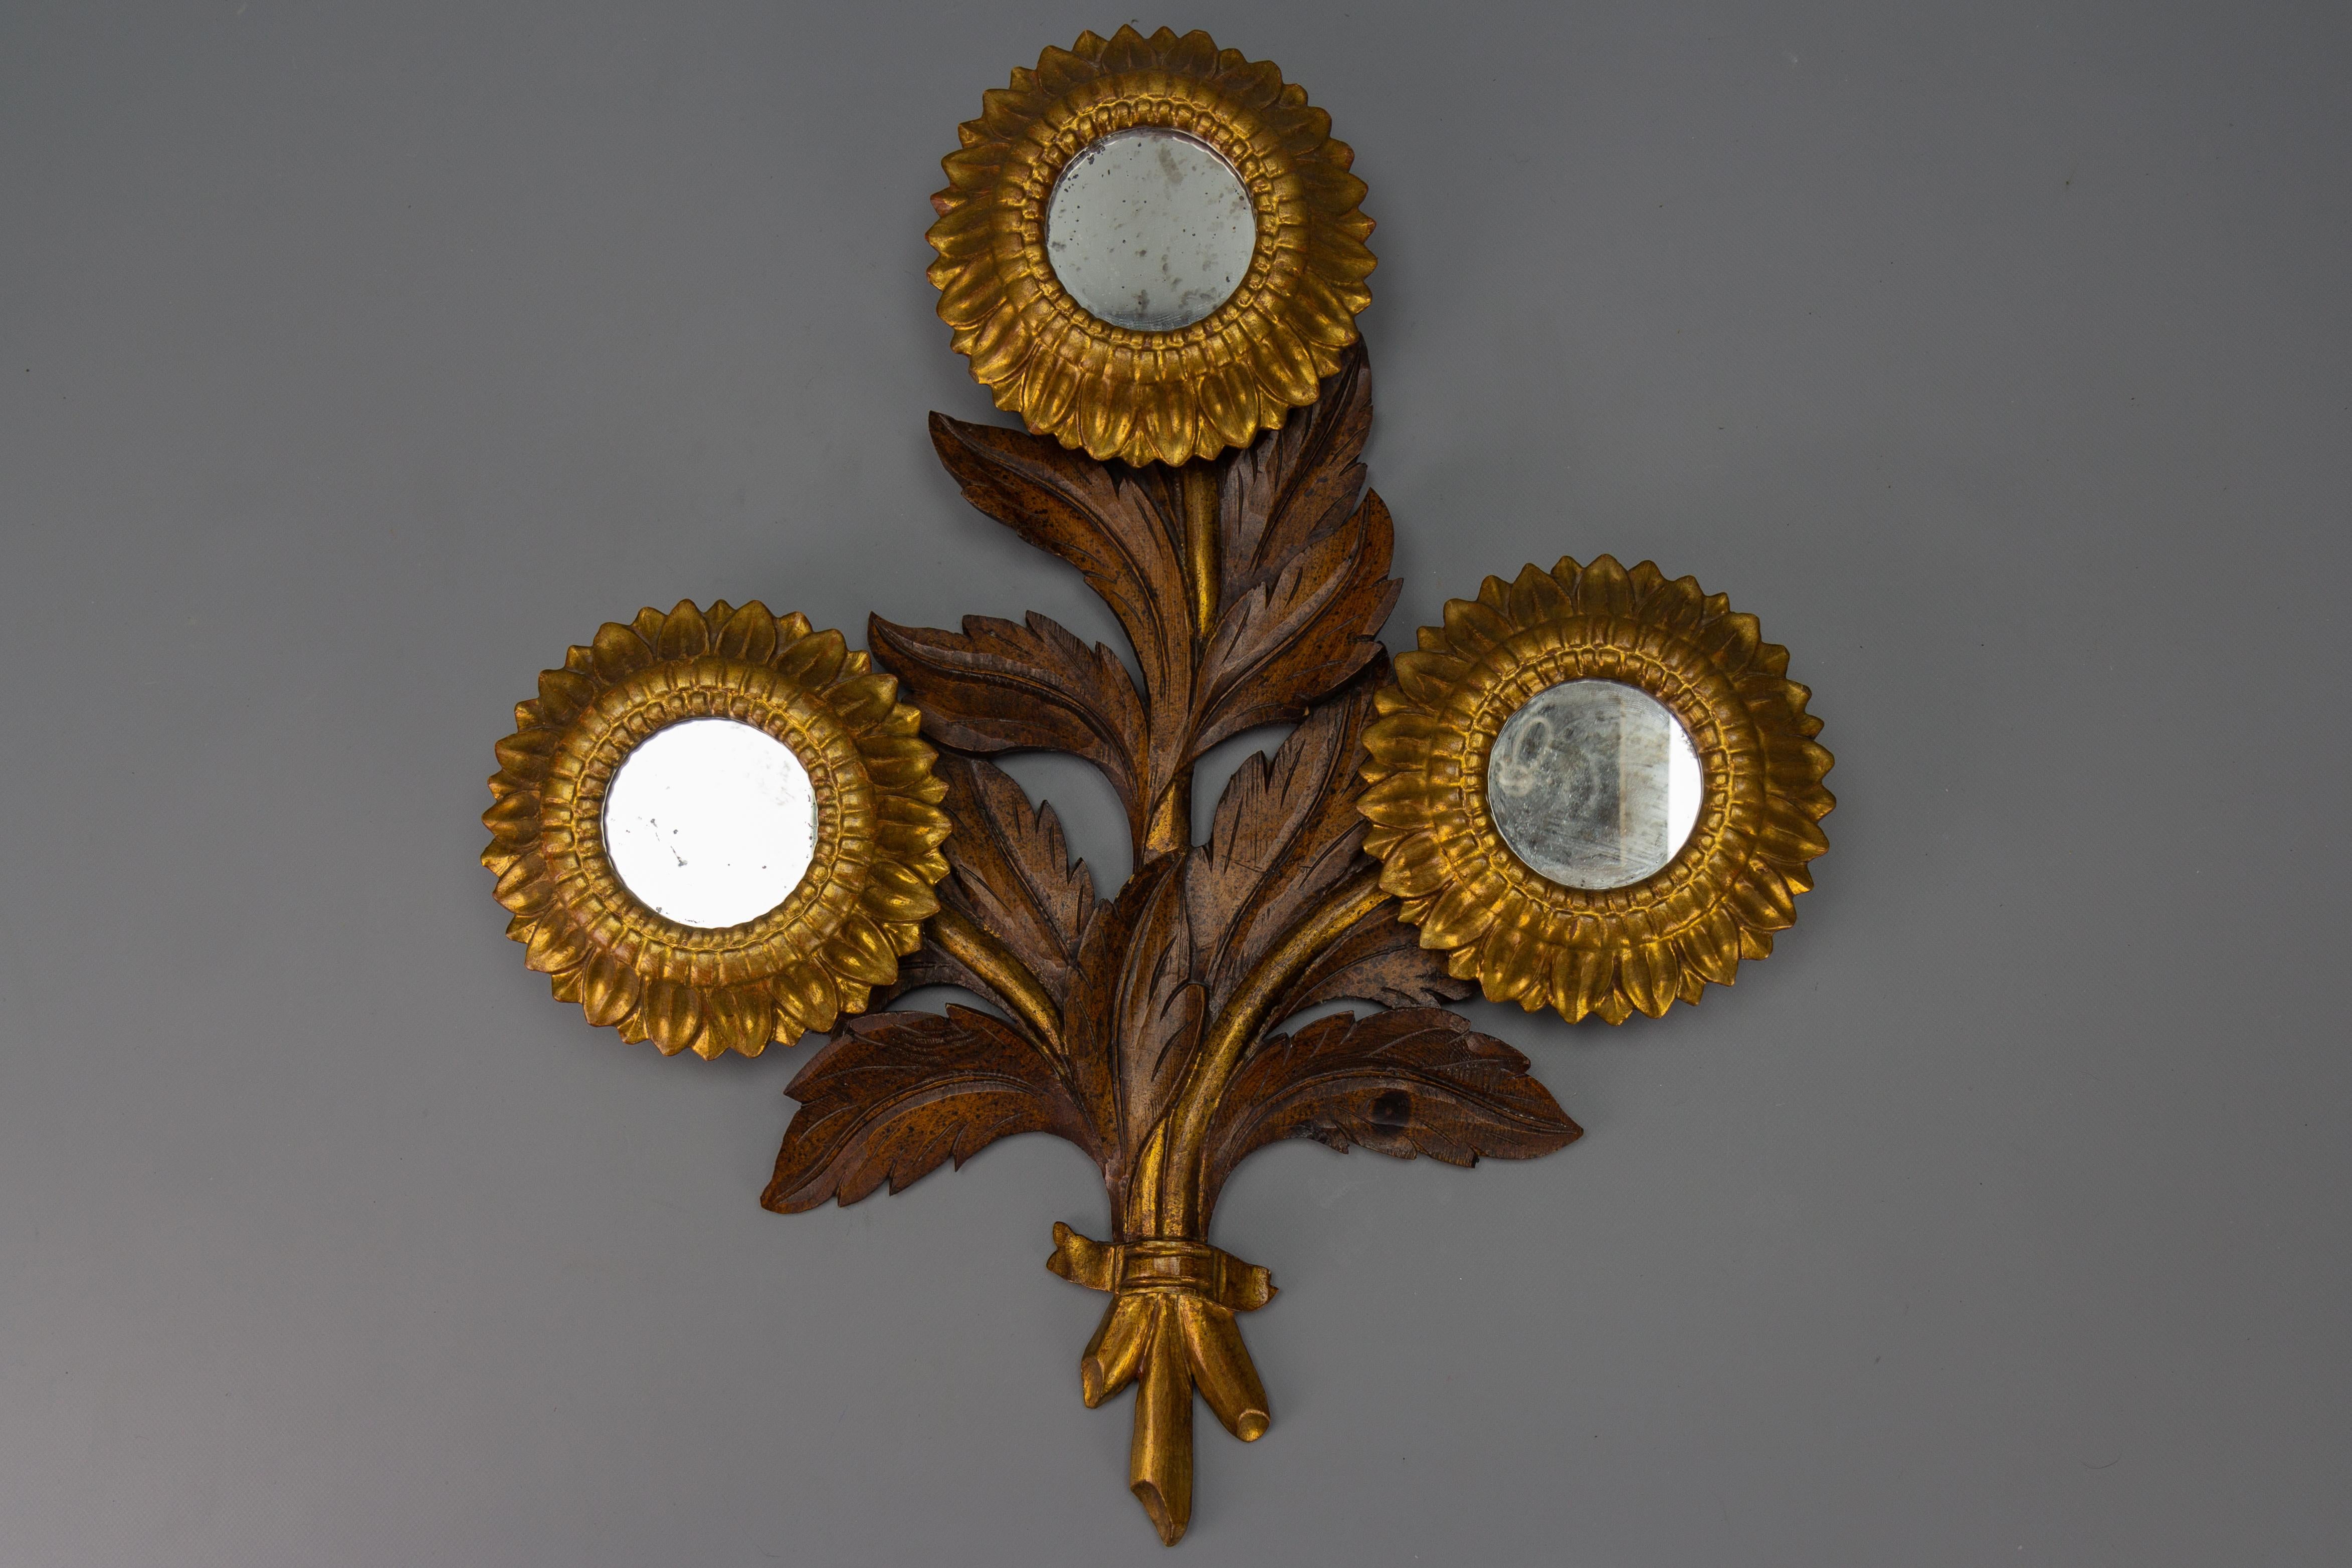 Mid-Century Carved Sunflower-Shaped Brown and Golden Wall Mirror, 1950s
This beautiful and unusual wall mirror or wall decor in the shape of a sunflower is carved and made of wood with three flowers, centered with round mirrors, and colored in